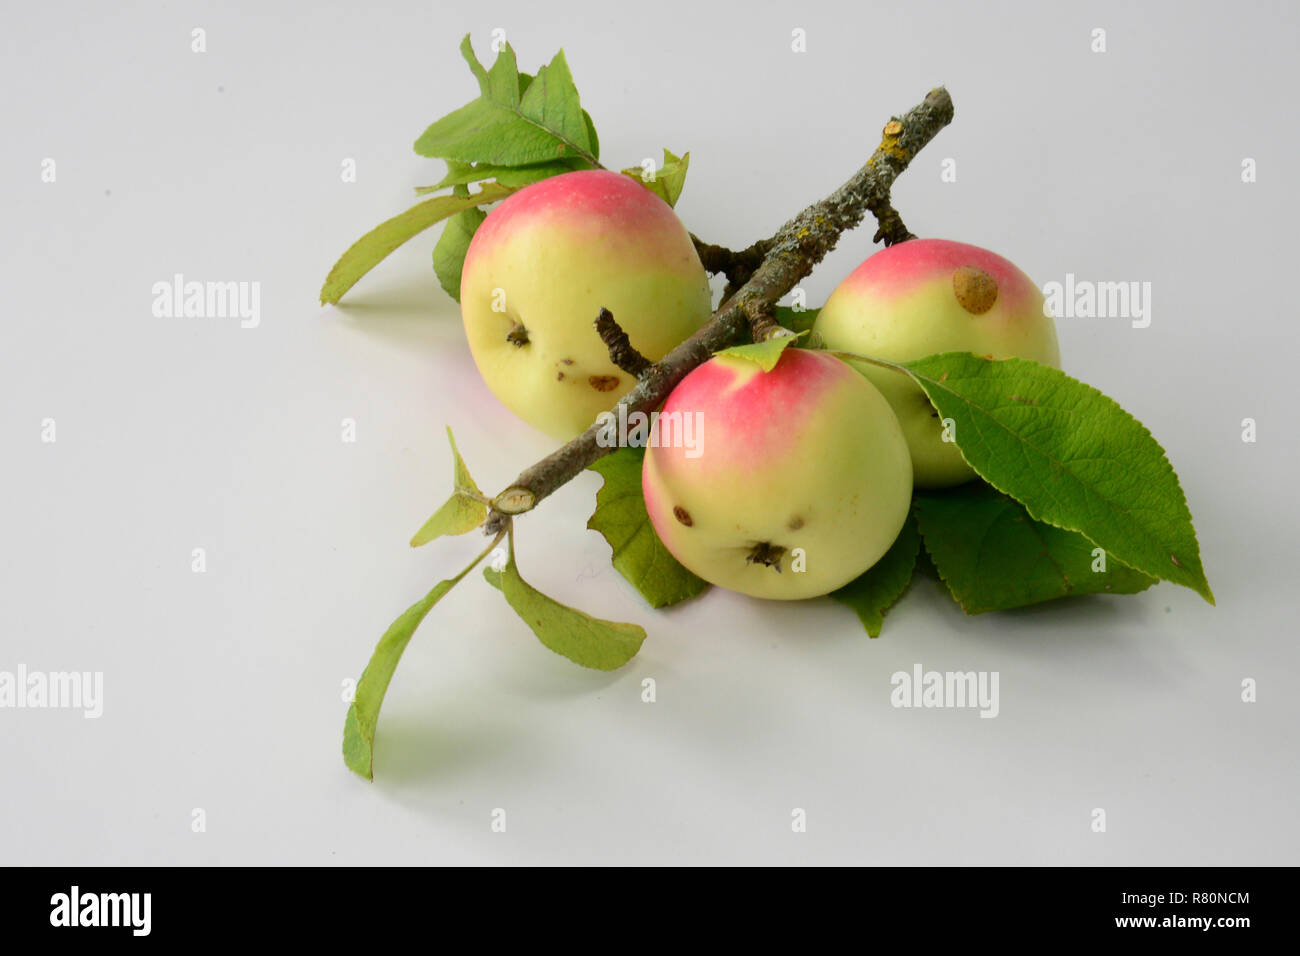 Common Crab Apple, Wild Crab Apple (Malus sylvestris). Twig with leaves and ripe apples. Studio picture against a white background Stock Photo